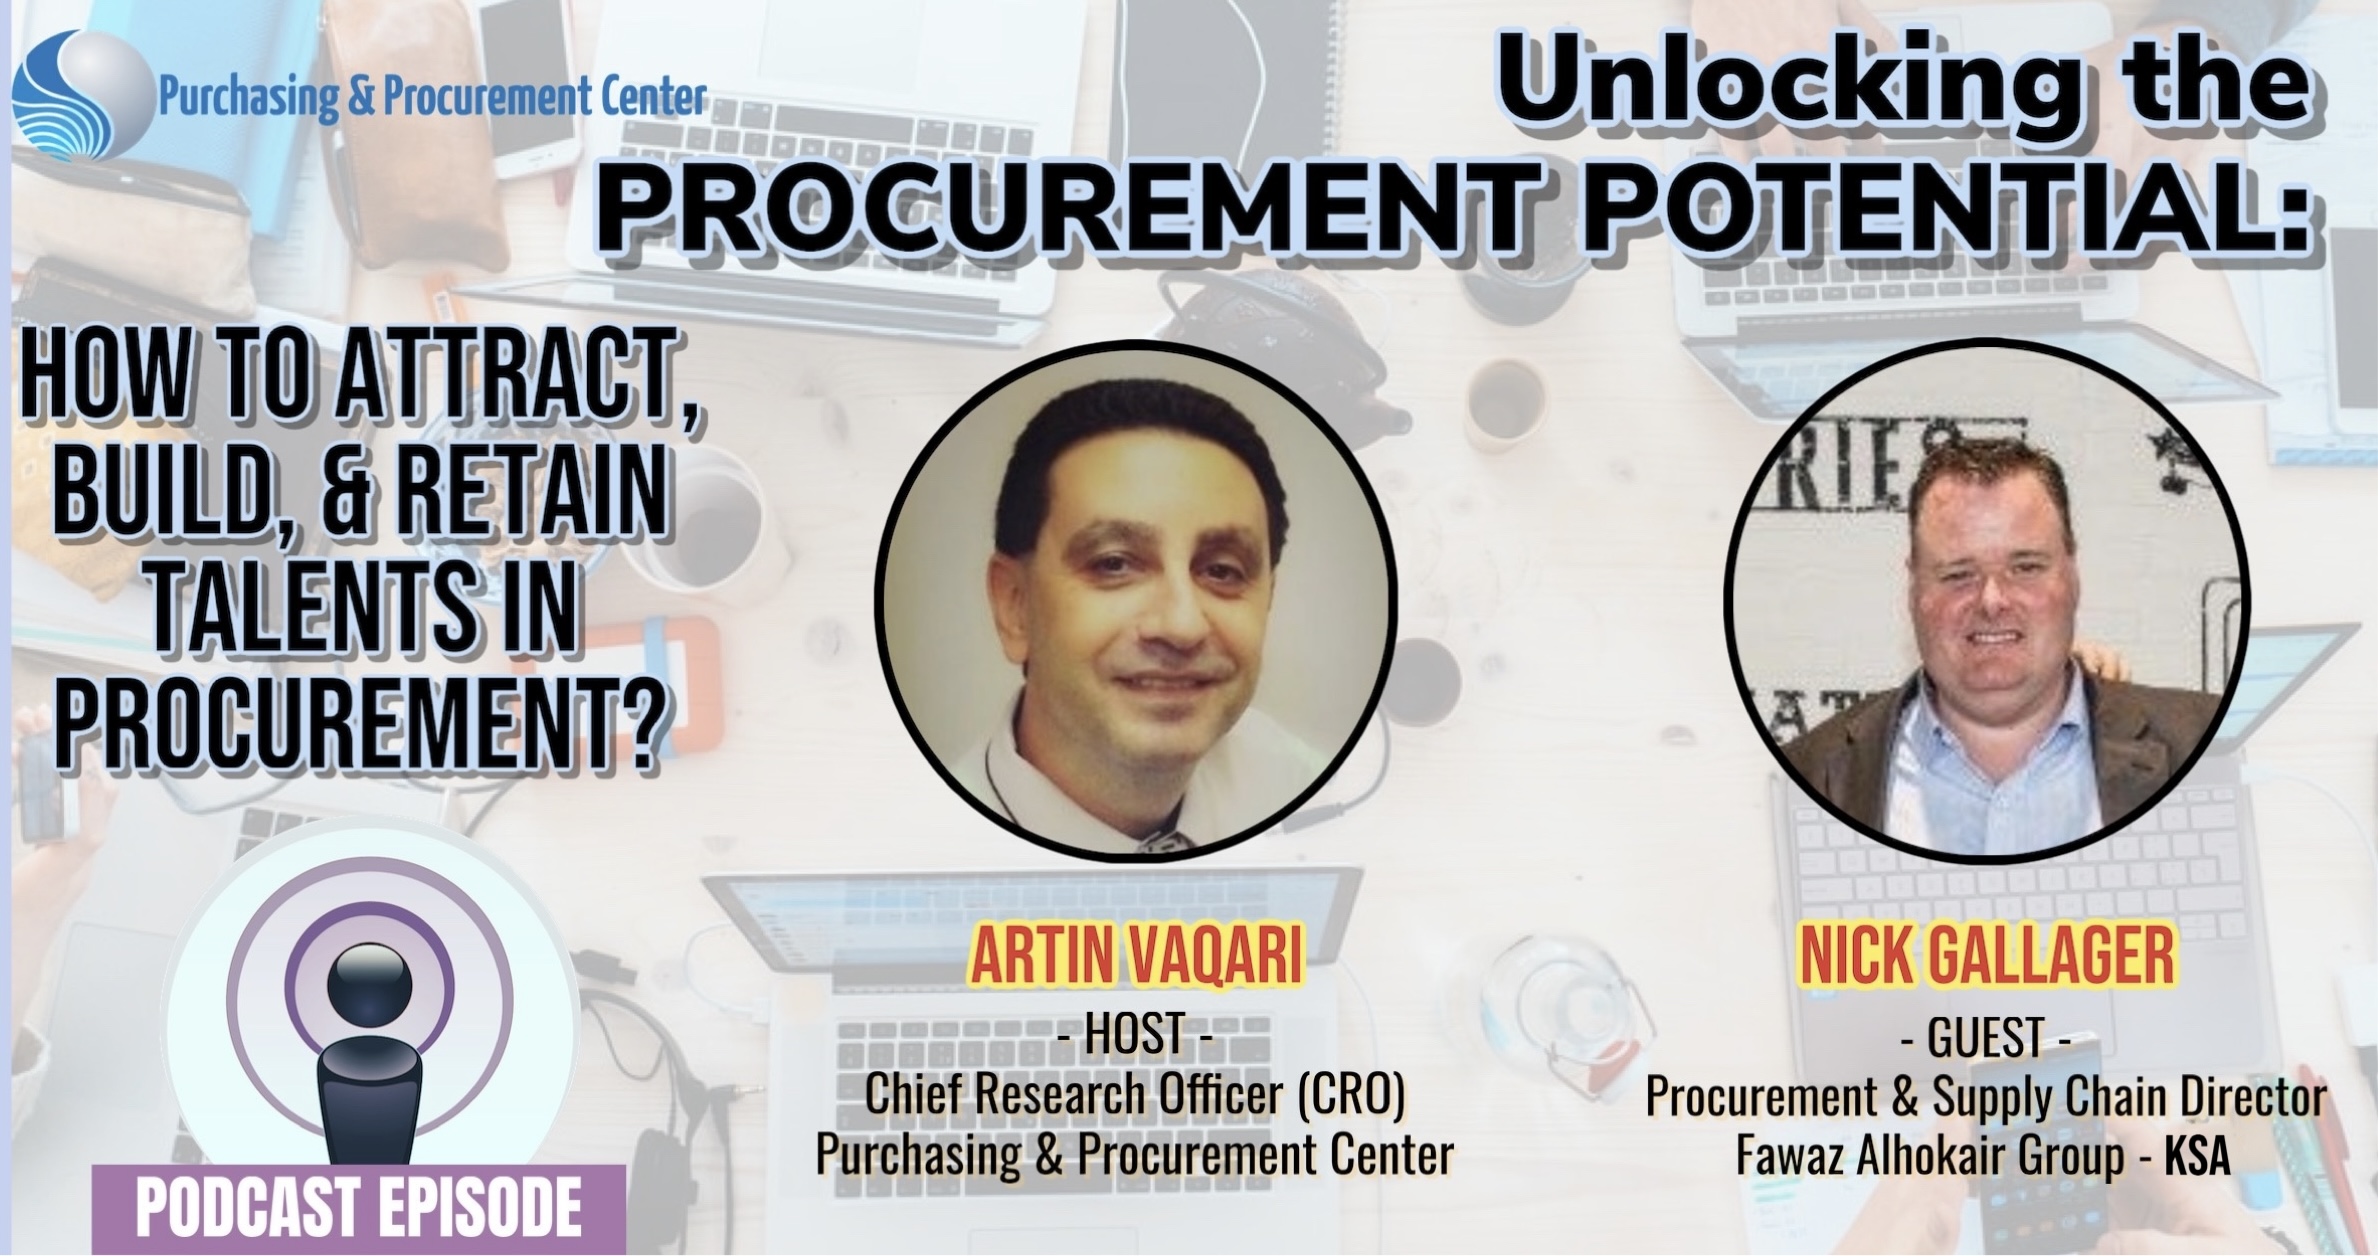 How to Attract, Build & Retain Talents in Procurement!